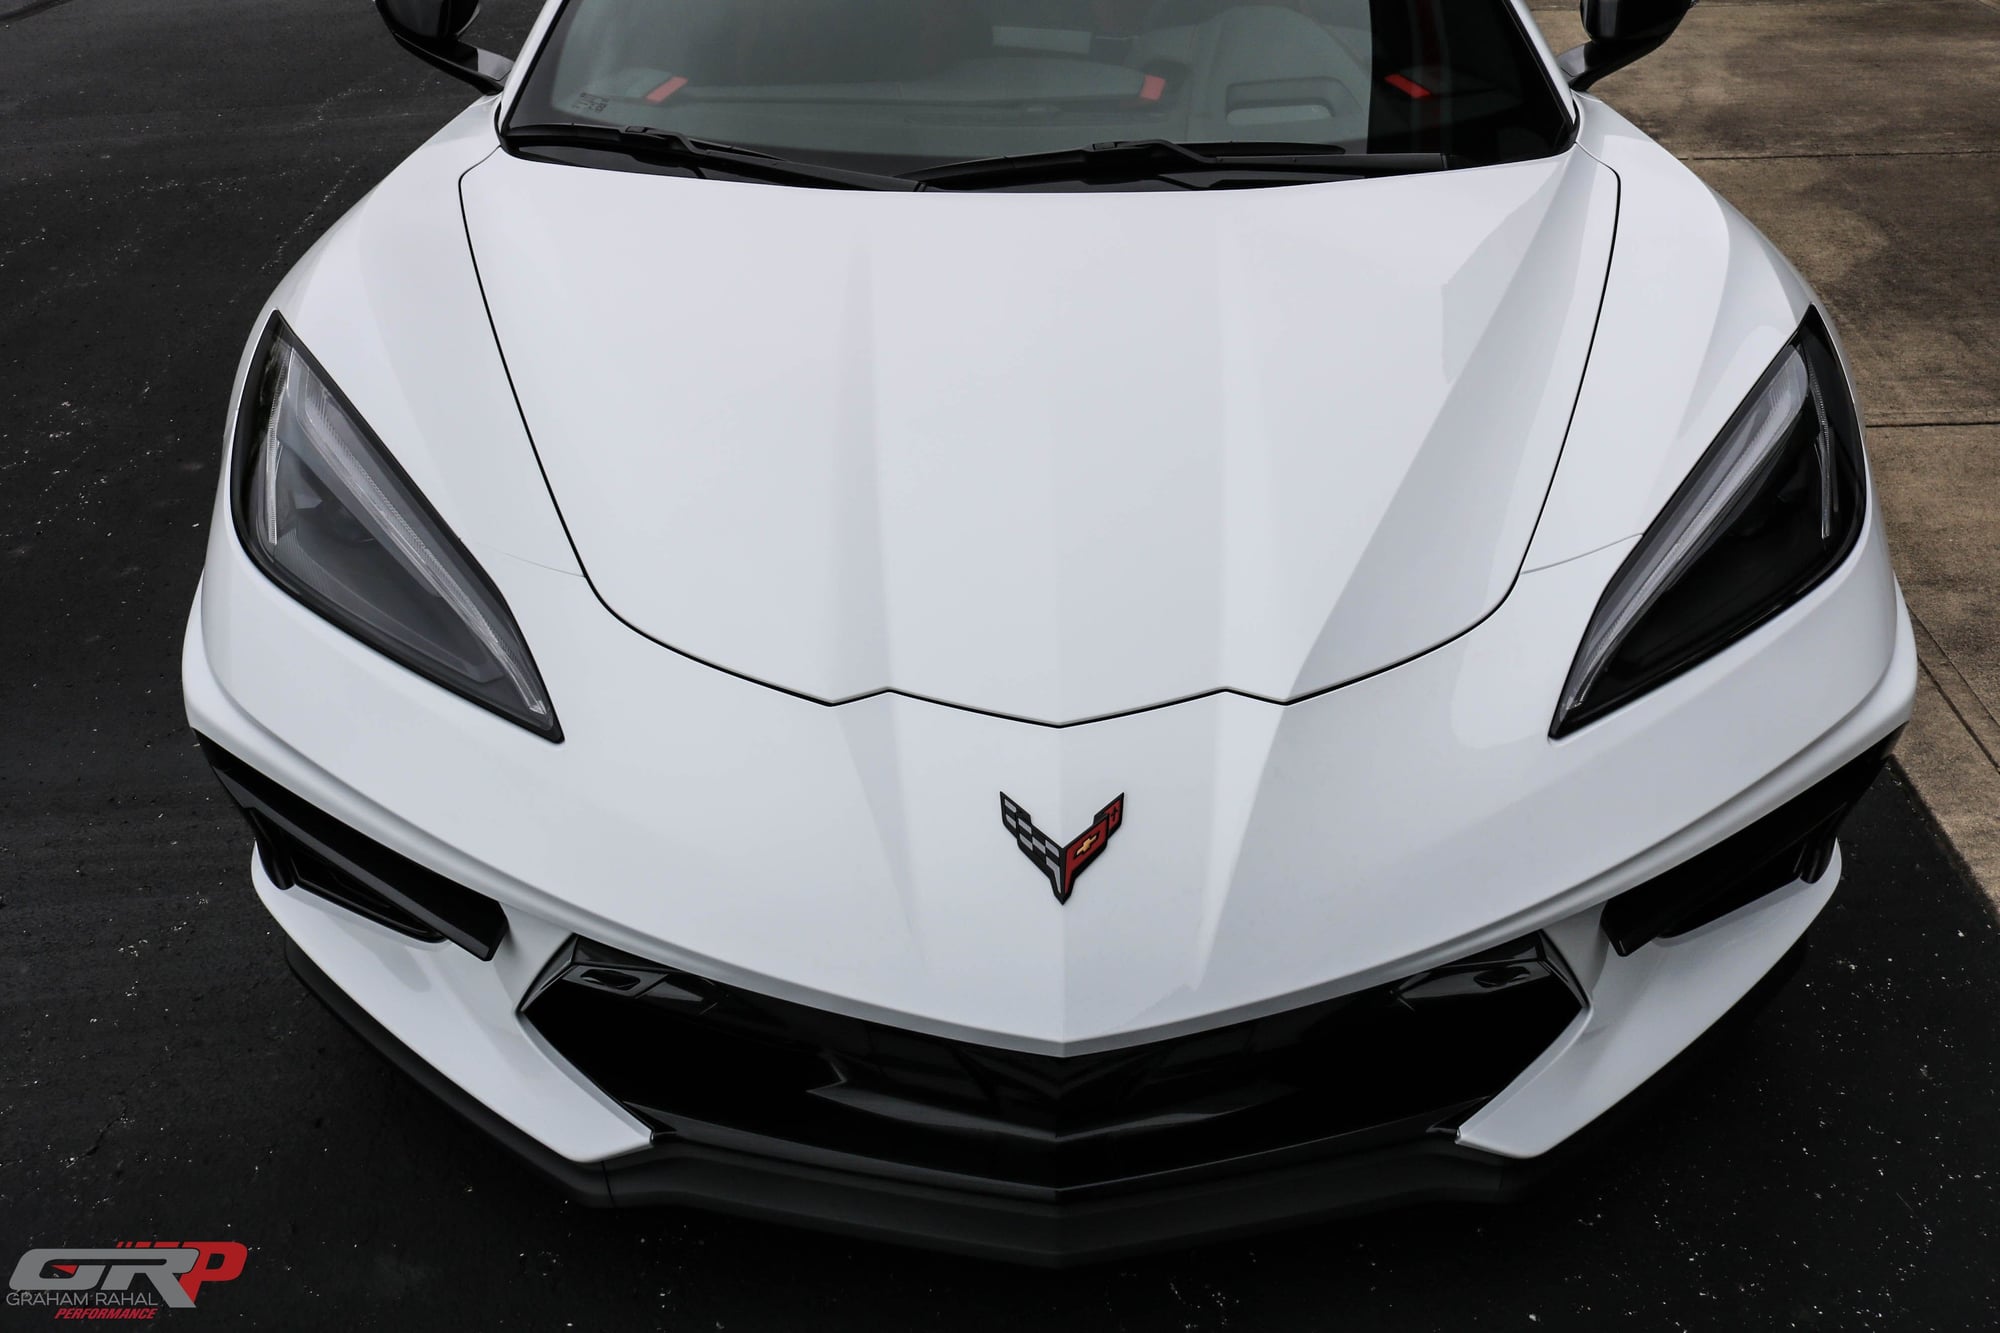 2020 Chevrolet Corvette - 2020 Chevrolet Corvette 3LT w/ Z51 Package - Used - VIN 1G1Y82D41L5101794 - 95 Miles - 8 cyl - 2WD - Automatic - Coupe - White - Brownsburg, IN 46112, United States